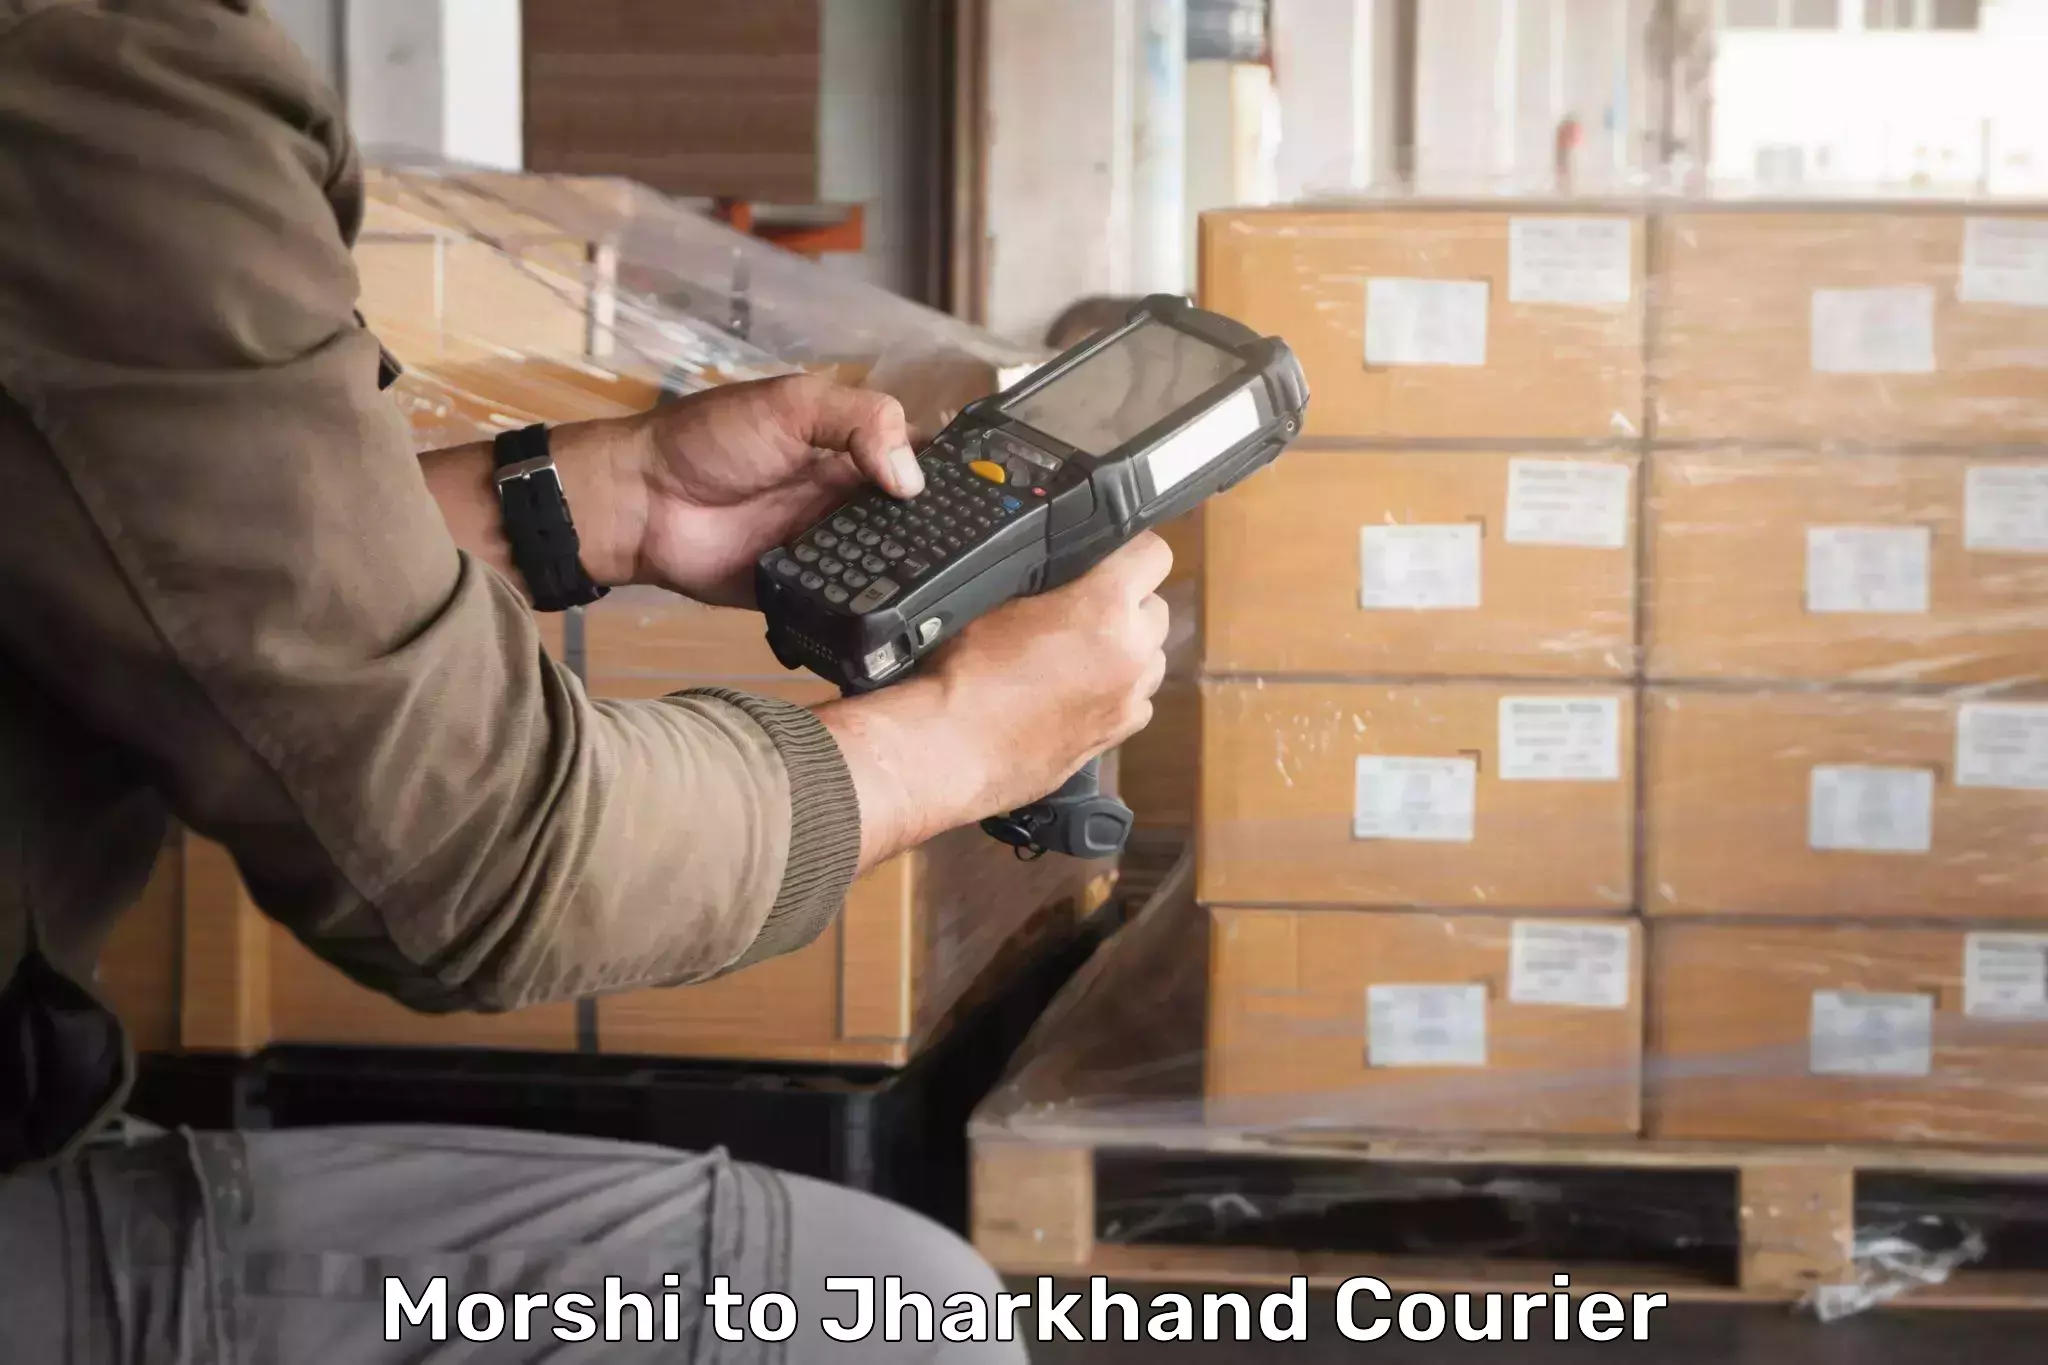 Customizable delivery plans Morshi to Isri